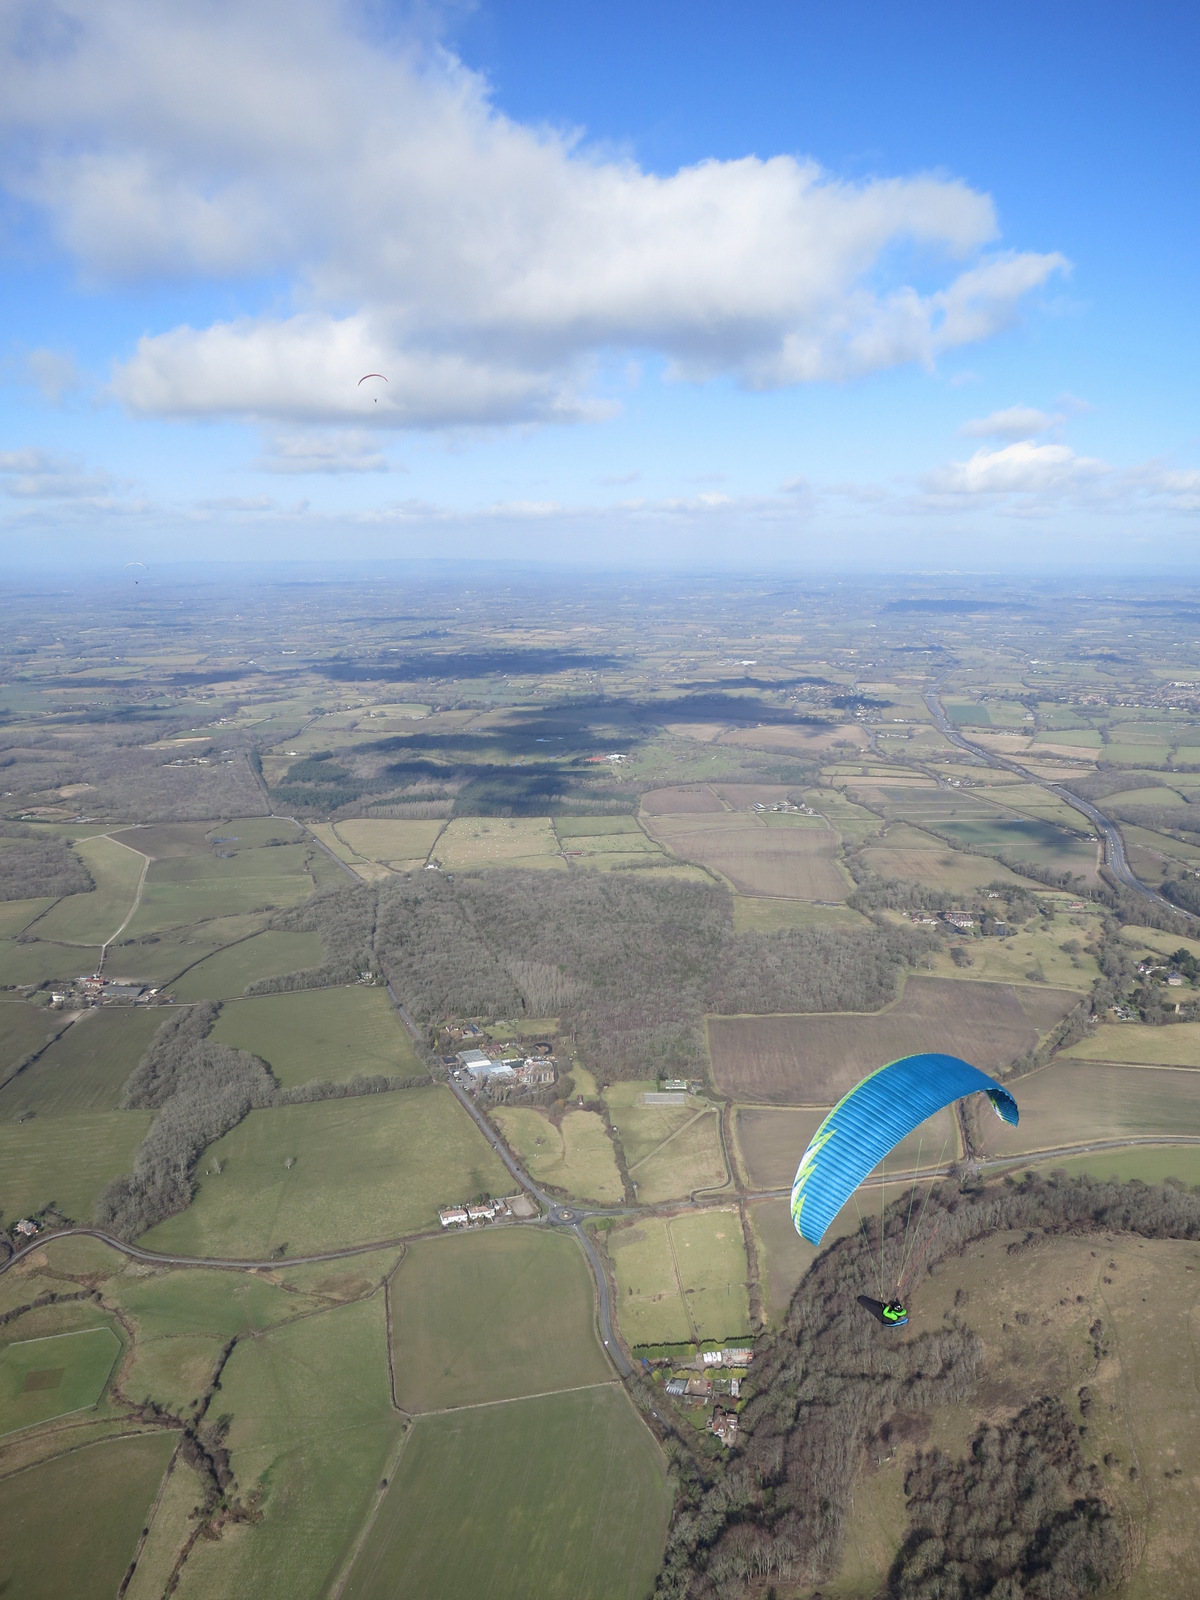 Gliding upwind over Newtimber, looking NE towards Hurstpierpoint and Burgess Hill.